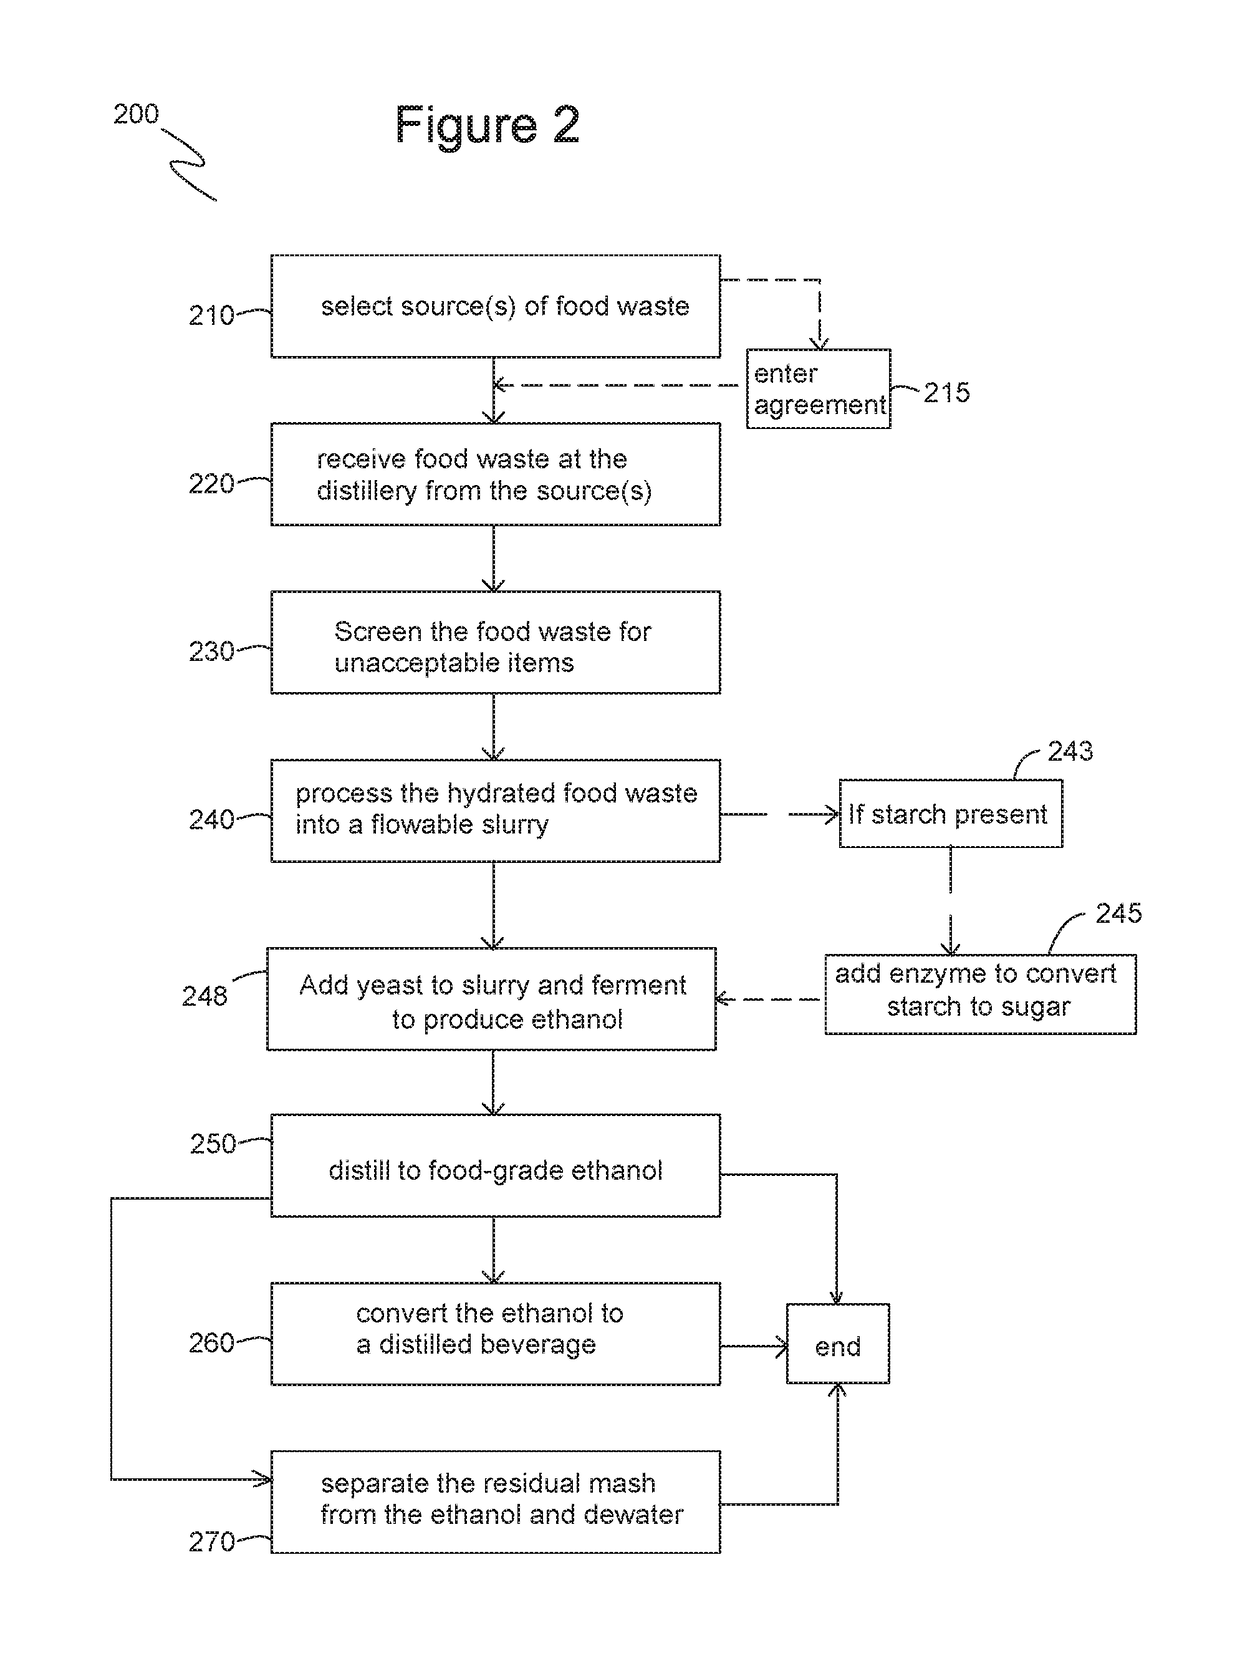 Systems and methods for distilling food grade ethanol from food waste